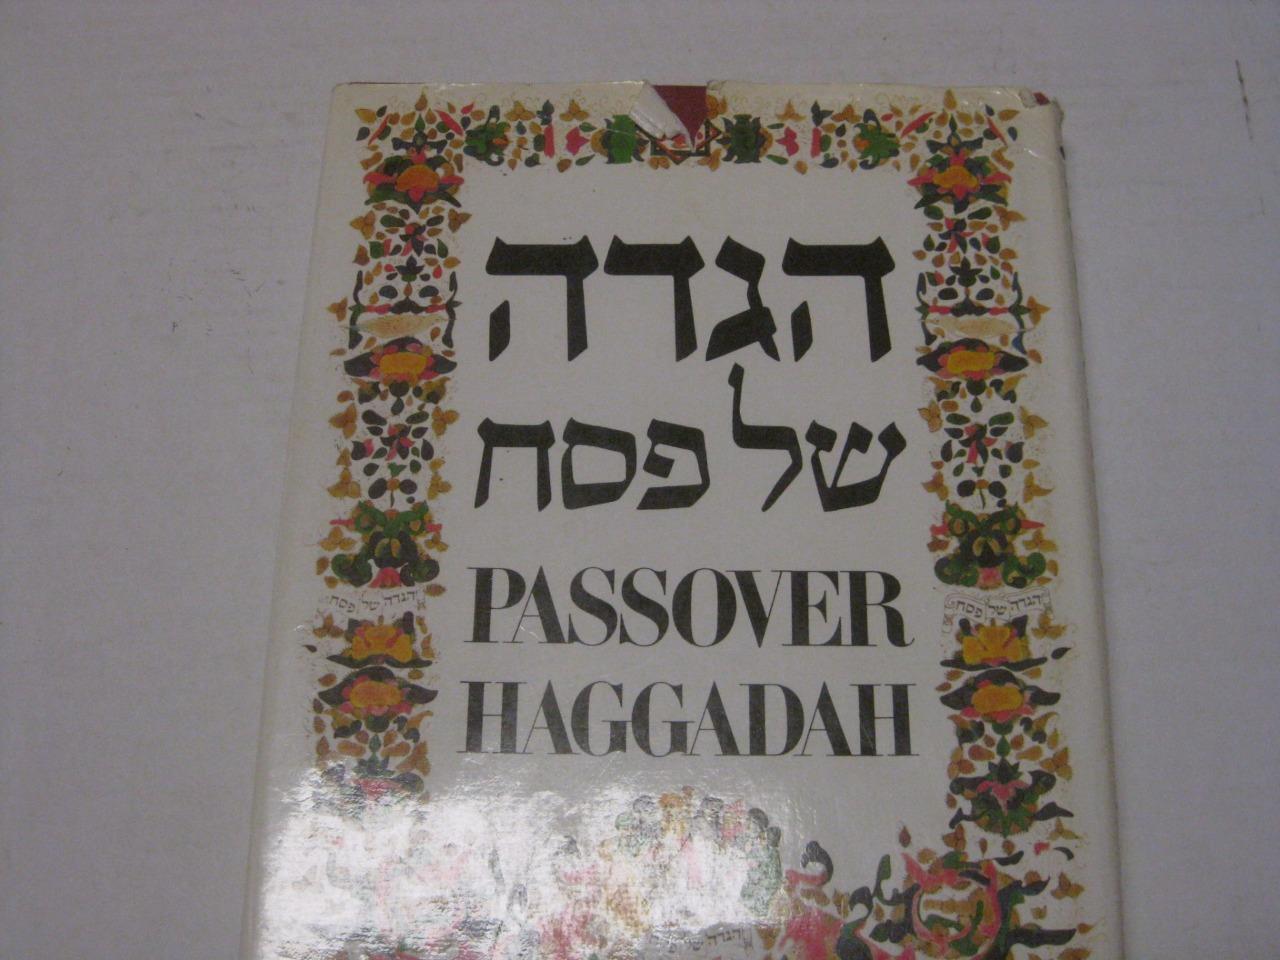 PASSOVER HAGGADAH A Feast of History Passover Through the Ages as a Key to ..